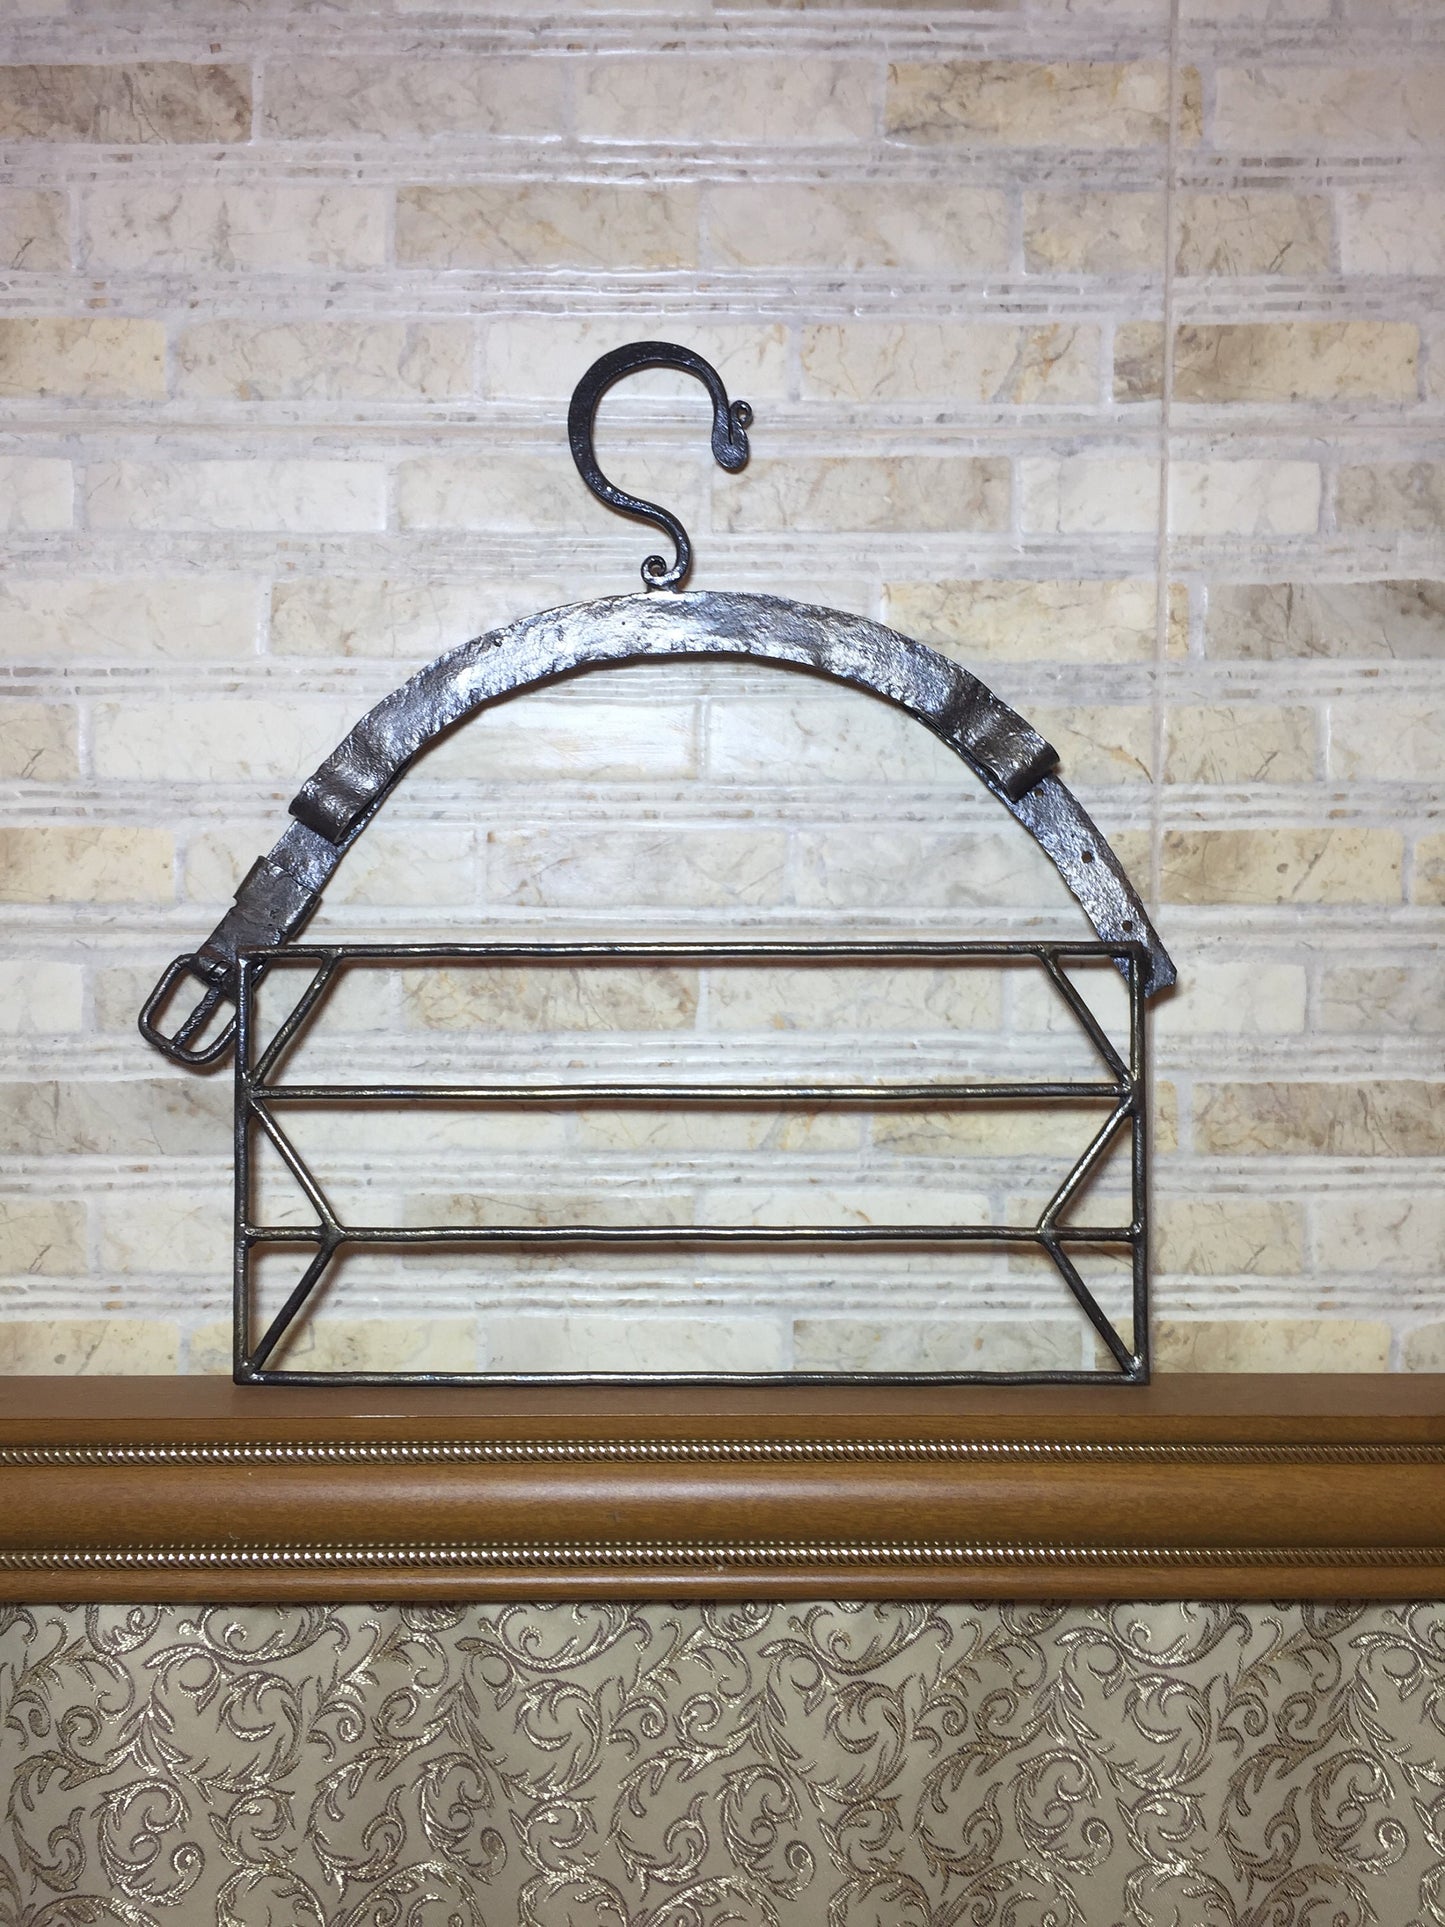 Hand forged tiered hanger for pants, clothes hangers, storage hangers, closet hangers, hangers set, coat hanger, dress hanger, father's day